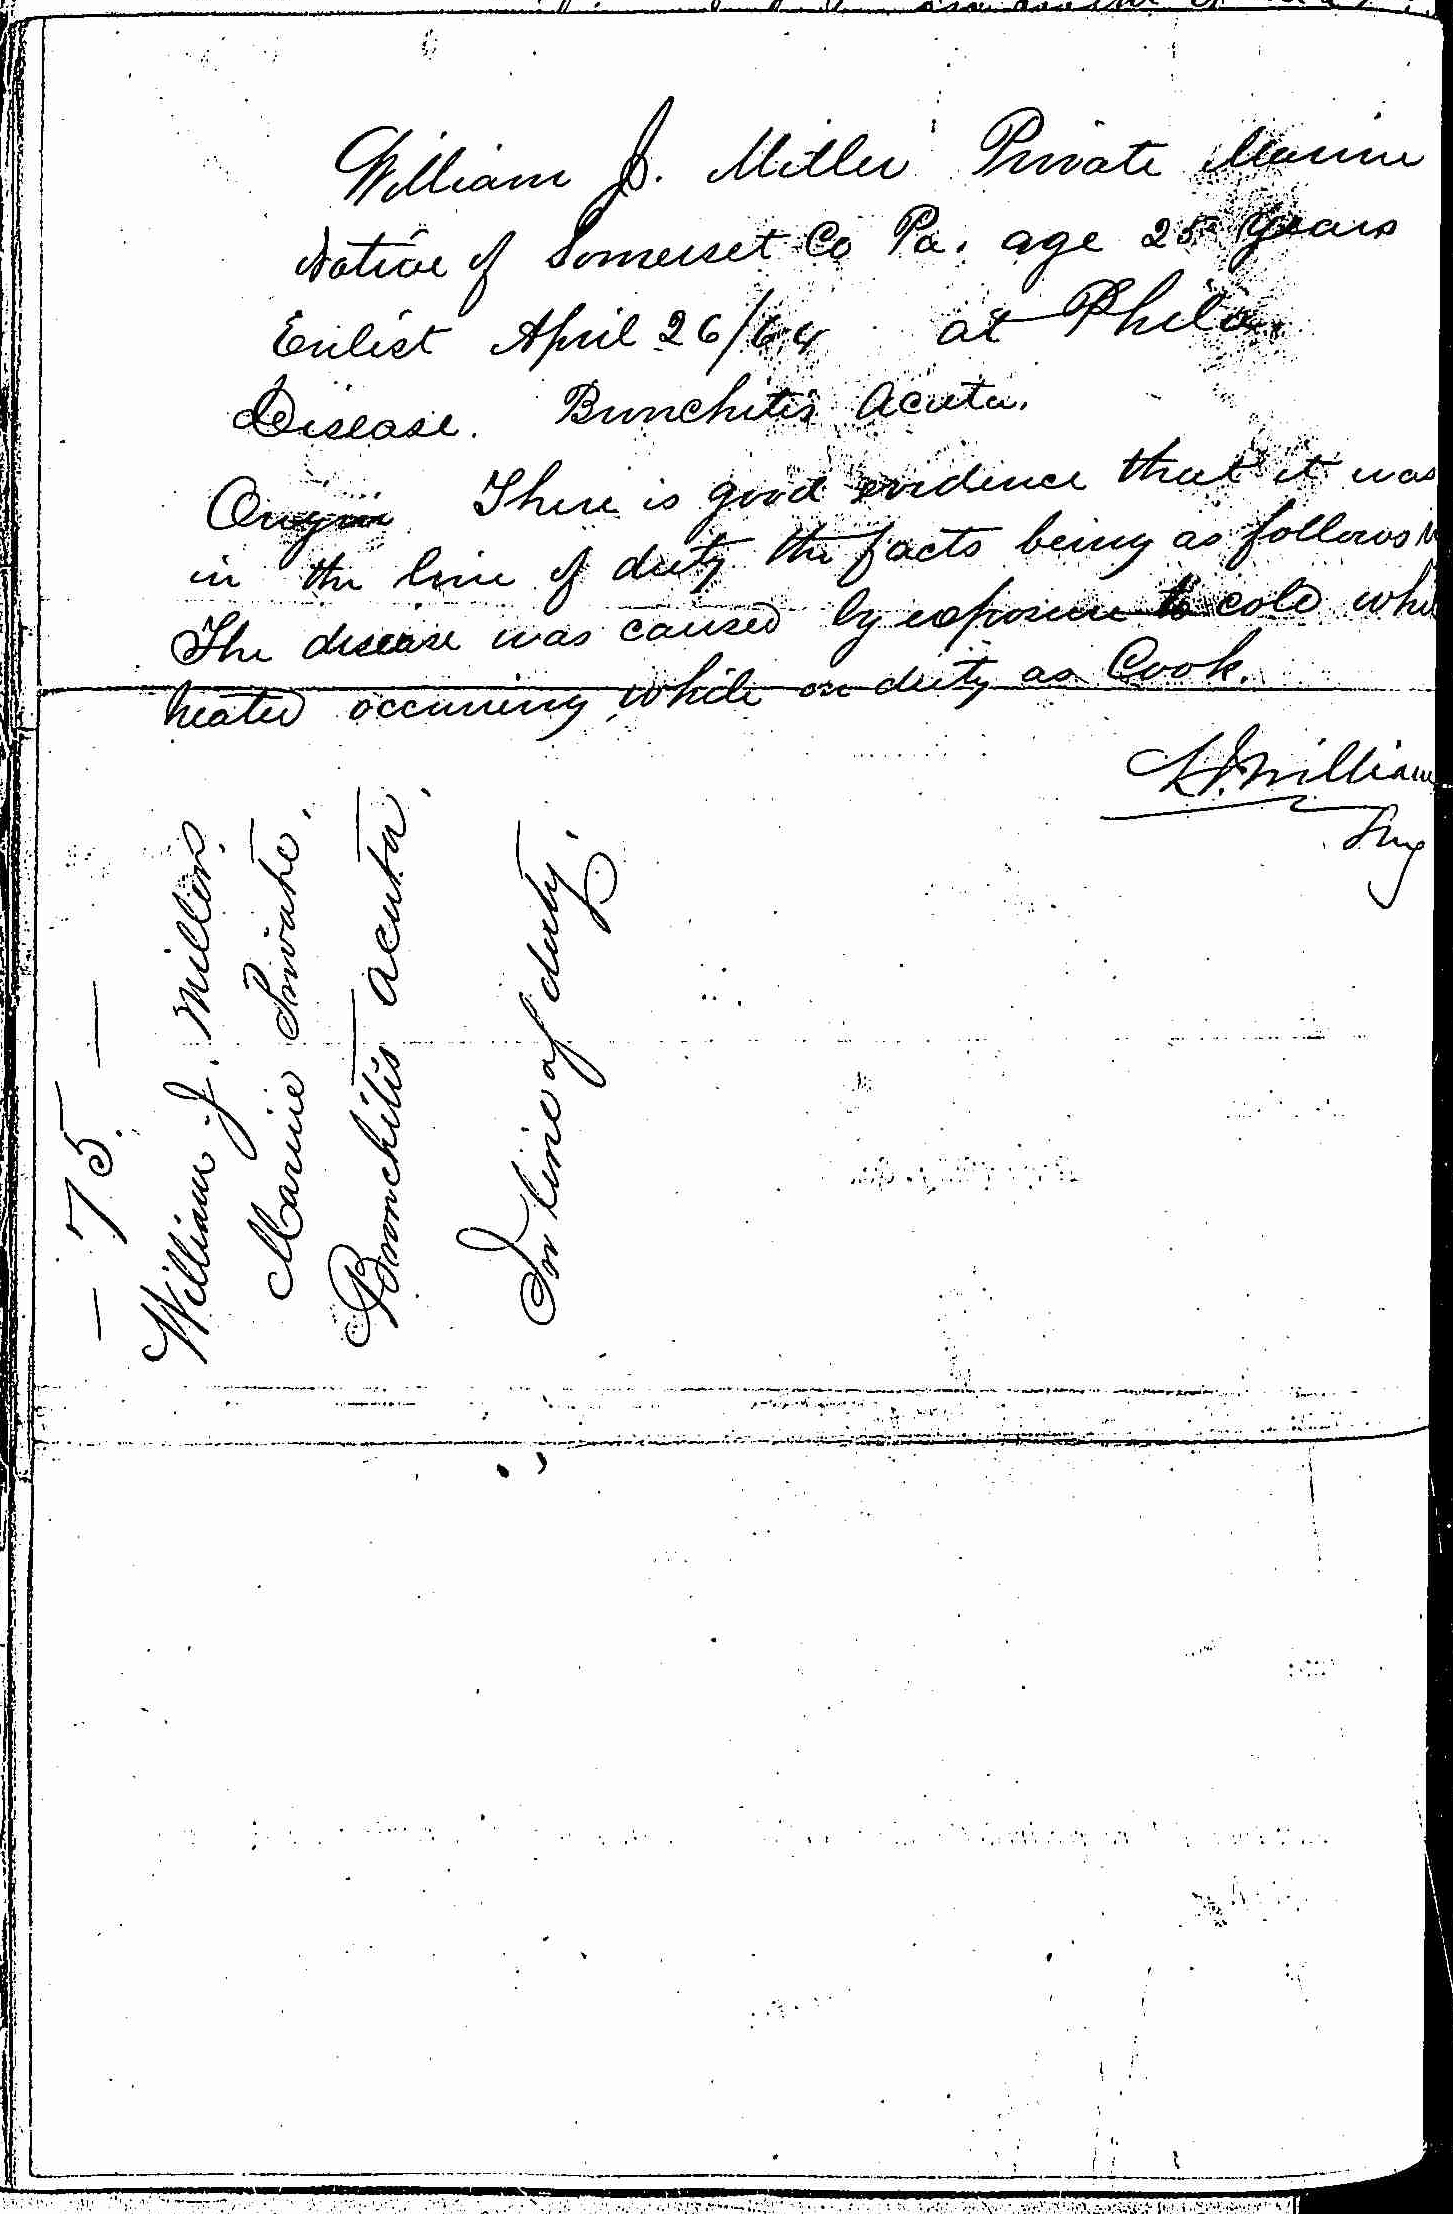 Entry for William J. Miller (page 2 of 2) in the log Hospital Tickets and Case Papers - Naval Hospital - Washington, D.C. - 1865-68